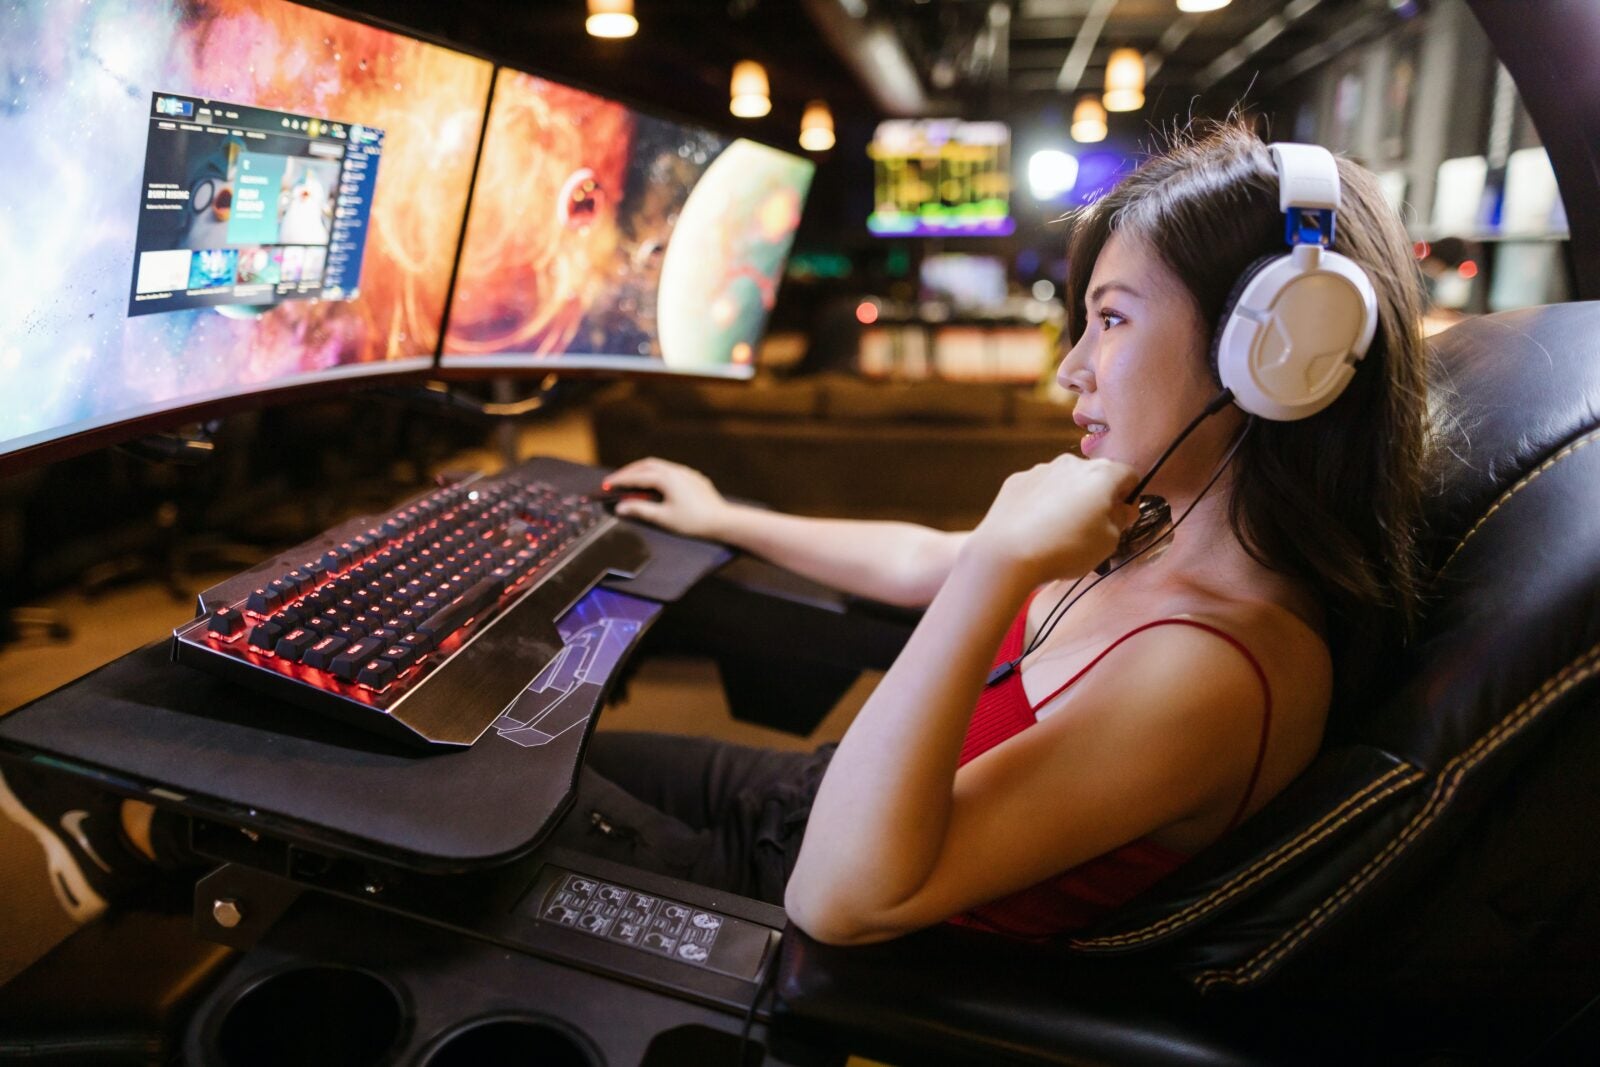 An Asian woman wearing a red top and white headphones using a gaming computer.